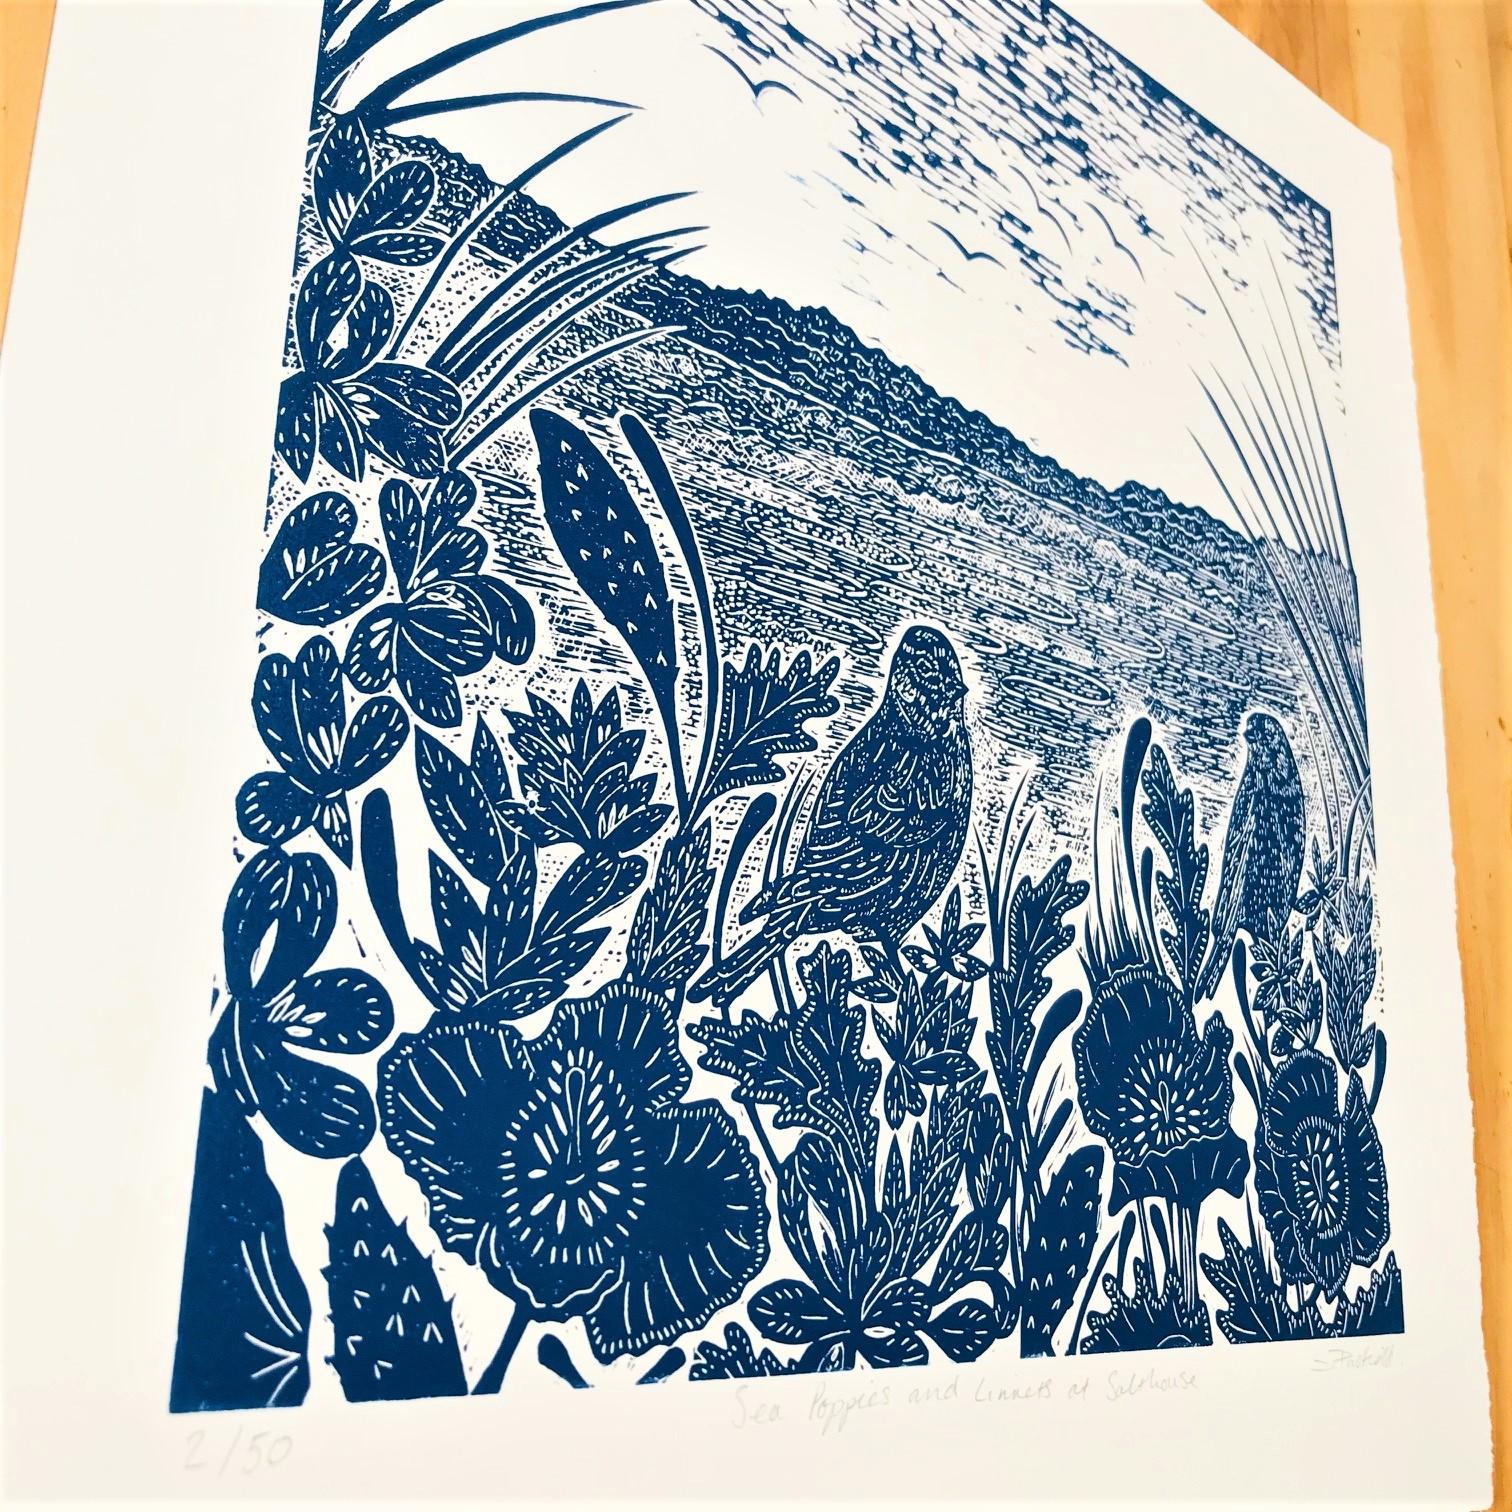 Sea Poppies and Linnets at Salthouse by Joanna Padfield [2022]
 
Sea Poppies and Linnets at Salthouse is an original limited edition linocut print, printed in blue. All of my prints are printed by hand. The inspiration for this print comes from